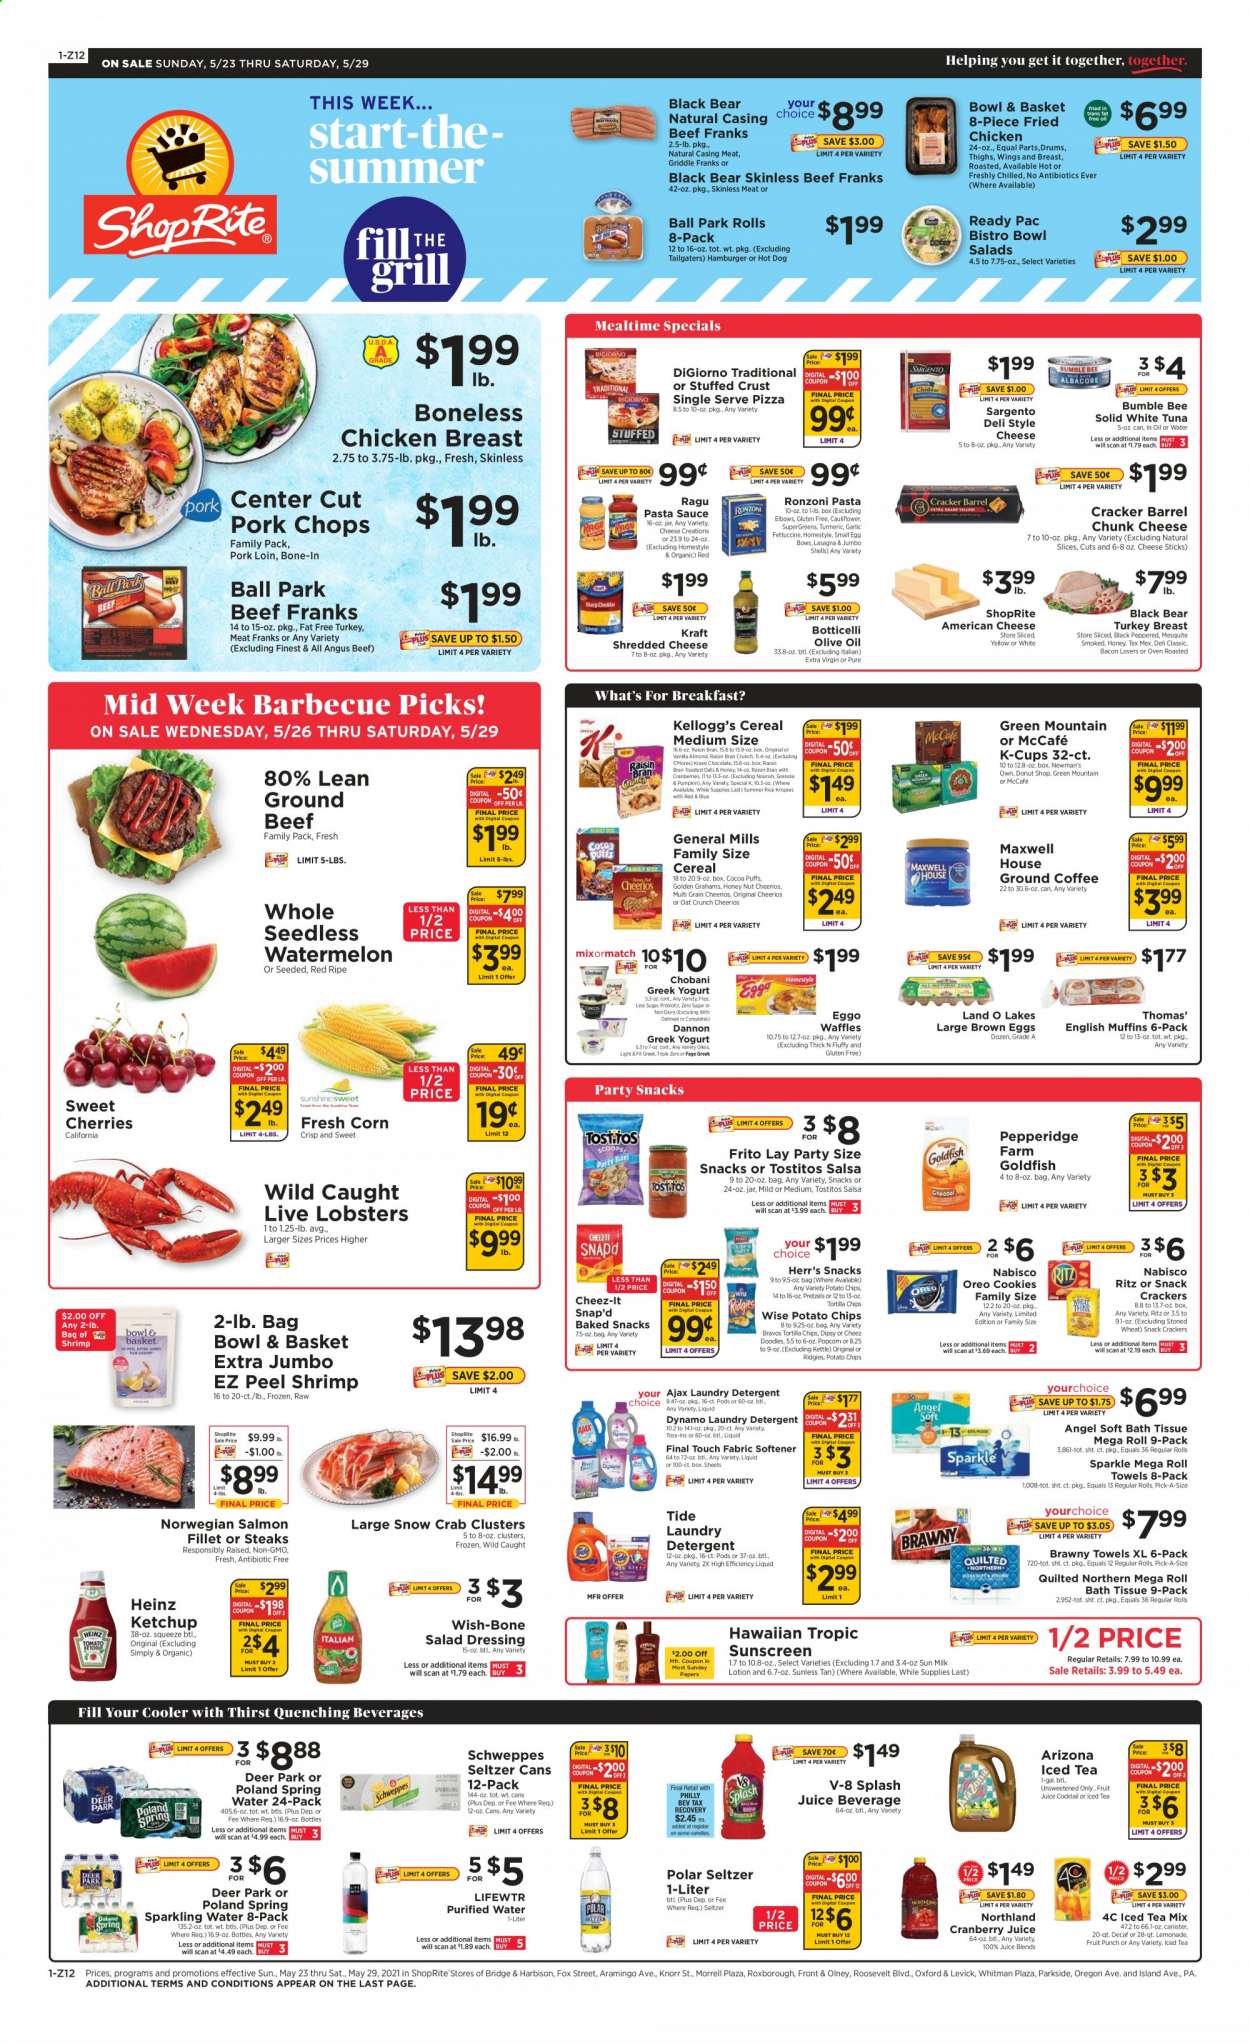 thumbnail - ShopRite Flyer - 05/23/2021 - 05/29/2021 - Sales products - english muffins, Bowl & Basket, waffles, corn, watermelon, cherries, lobster, salmon, salmon fillet, tuna, crab, shrimps, hot dog, pizza, pasta sauce, hamburger, Bumble Bee, Knorr, sauce, fried chicken, Ready Pac, Kraft®, ragú pasta, american cheese, shredded cheese, chunk cheese, Sargento, greek yoghurt, Oreo, yoghurt, Chobani, Dannon, eggs, cheese sticks, cookies, crackers, Kellogg's, RITZ, Goldfish, Cheez-It, Tostitos, cocoa, Heinz, cereals, Cheerios, salad dressing, ketchup, dressing, salsa, ragu, olive oil, oil, cranberry juice, lemonade, Schweppes, juice, ice tea, AriZona, fruit punch, seltzer water, spring water, sparkling water, purified water, Lifewtr, coffee, ground coffee, coffee capsules, McCafe, K-Cups, Green Mountain, turkey breast, chicken breasts, beef meat, ground beef, steak, pork chops, pork loin, pork meat, bath tissue, Quilted Northern, paper towels, detergent, Ajax, Tide, fabric softener, laundry detergent, body lotion. Page 1.